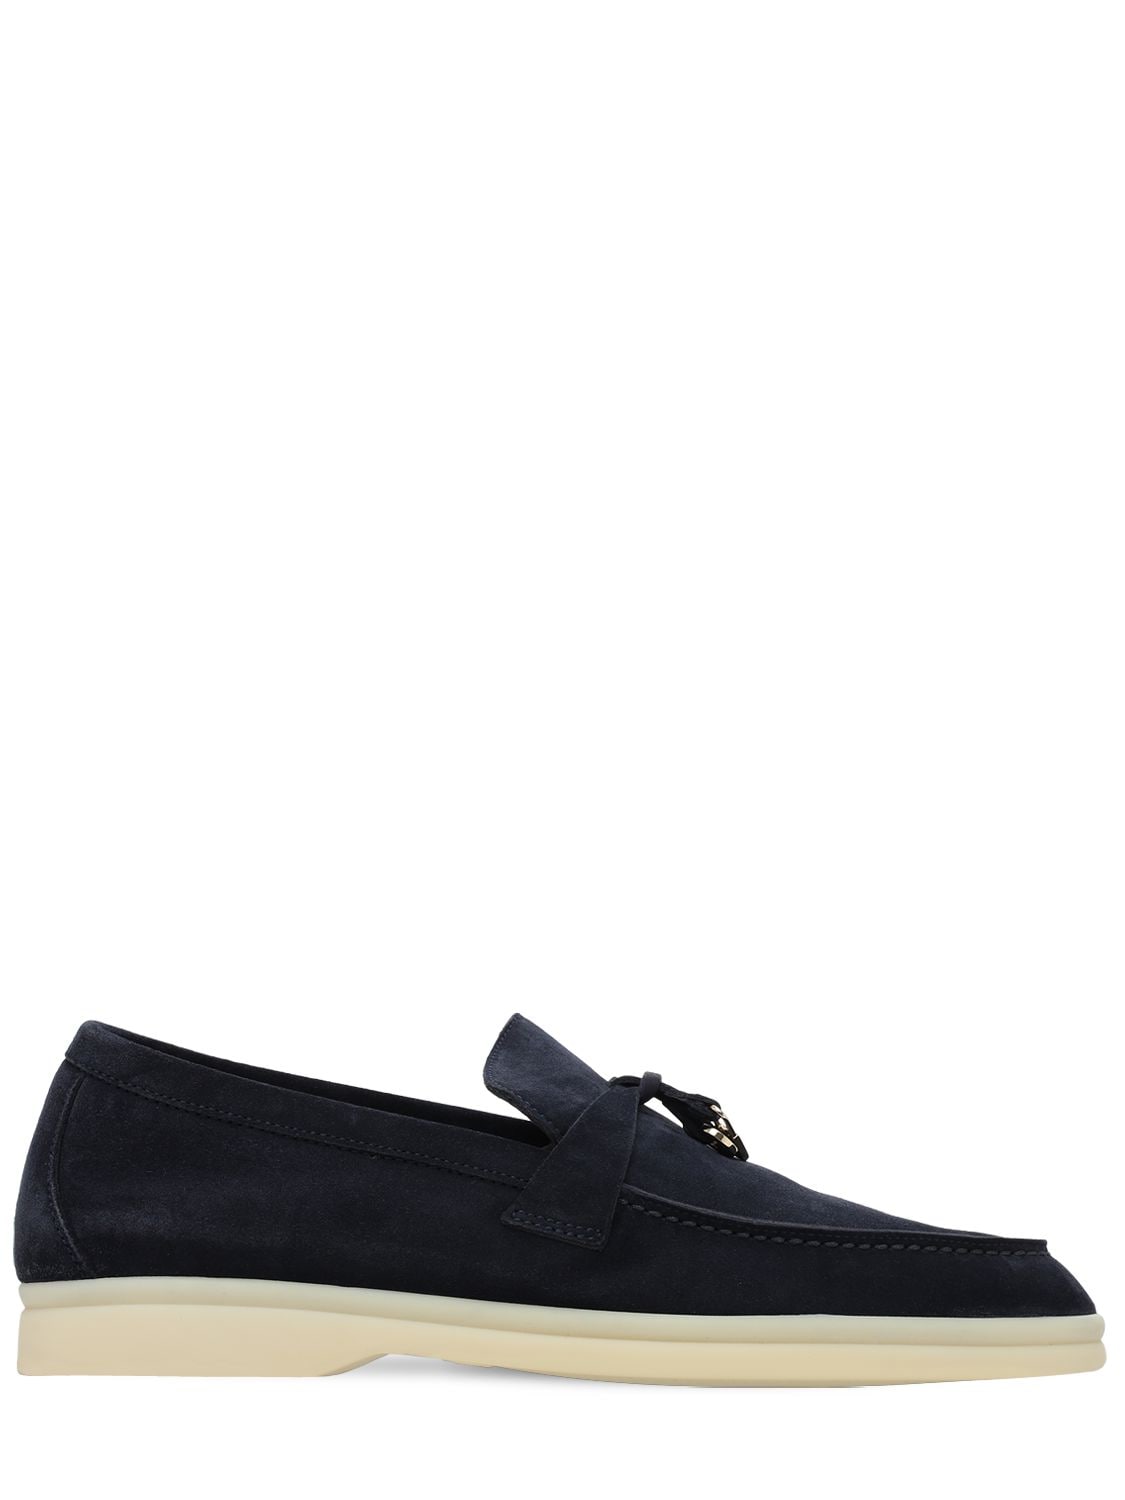 Loro Piana 10mm Summer Charms Walk Suede Loafers In Navy